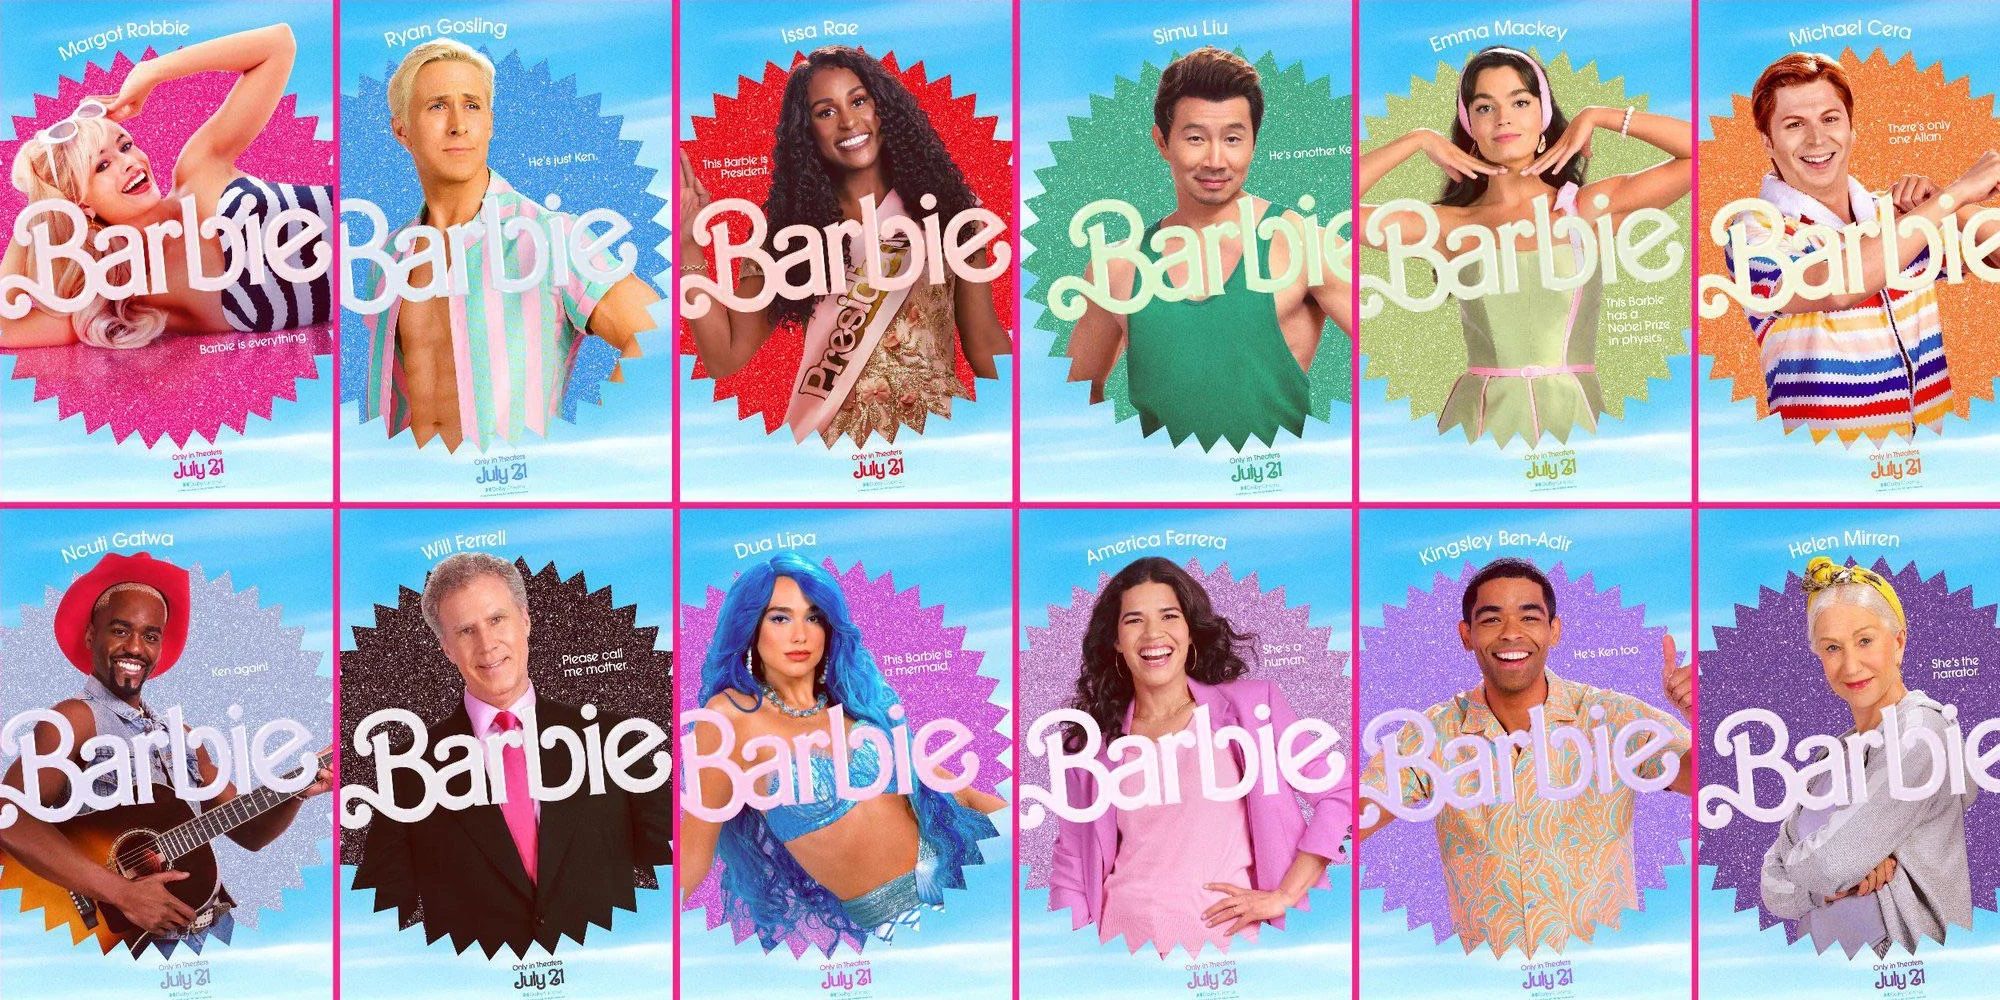 A collage of character posters for Barbie